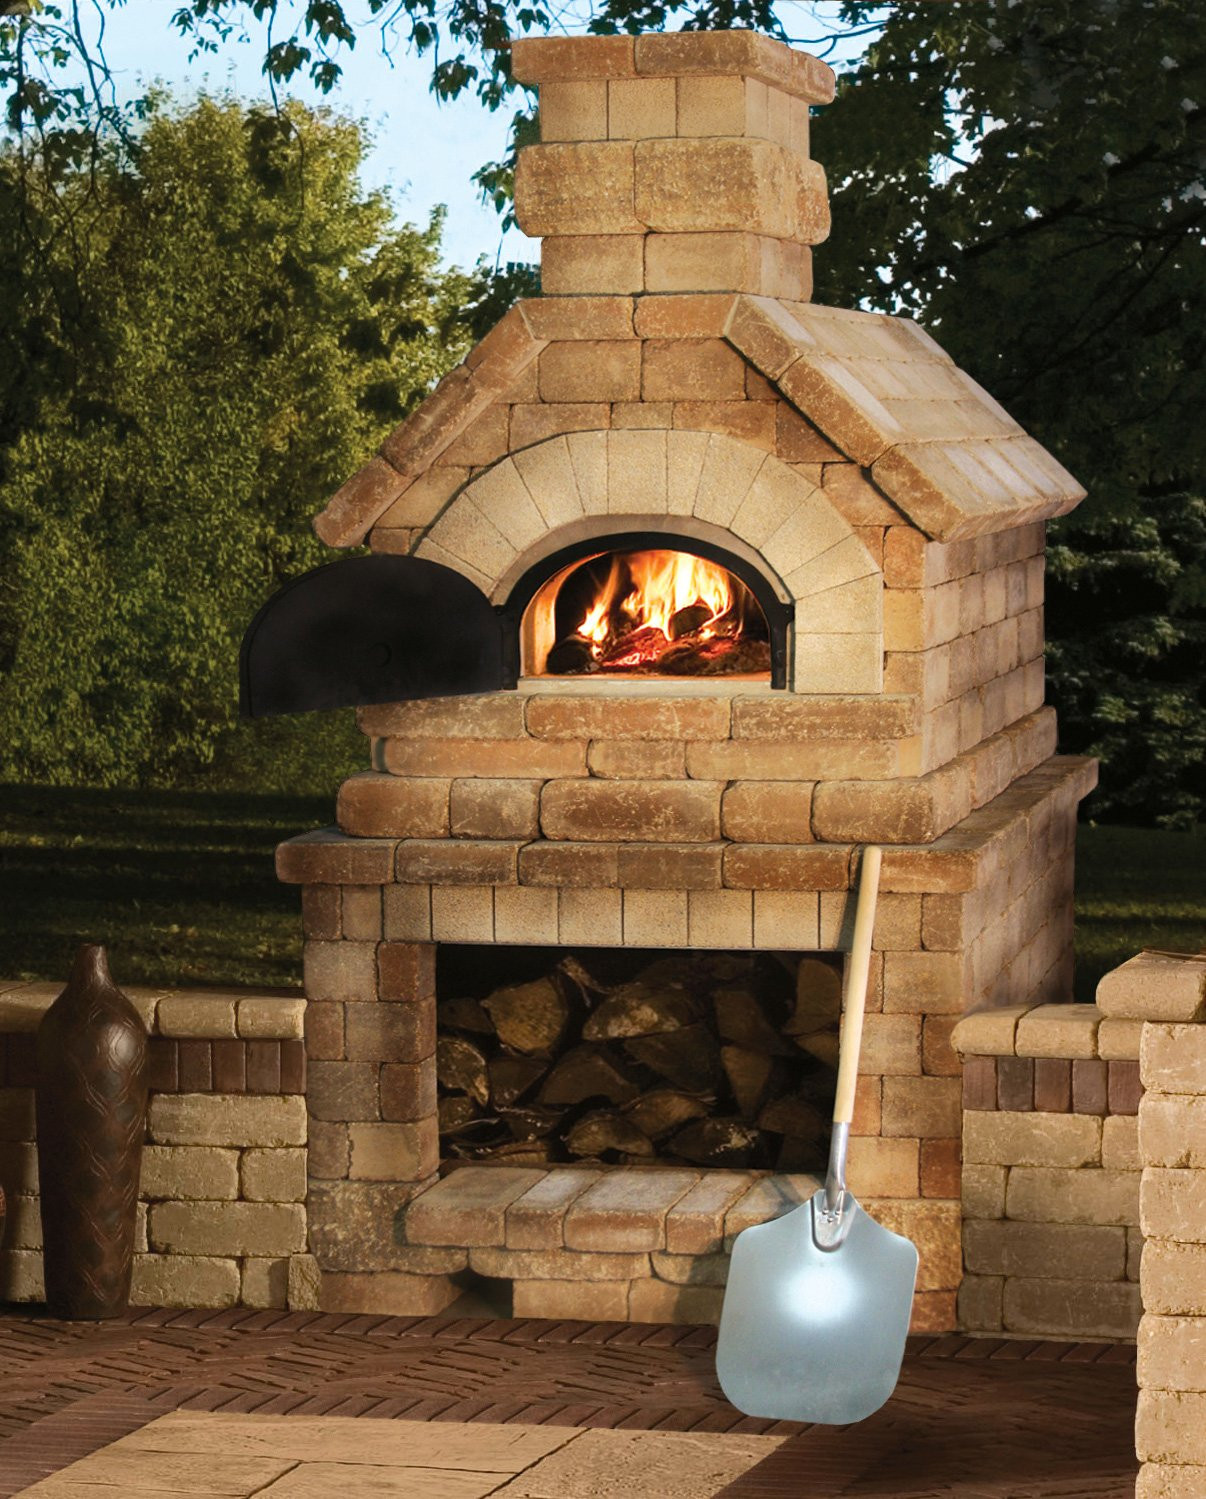 DIY Outdoor Pizza Oven
 CBO 750 DIY Wood Fired Oven Kit